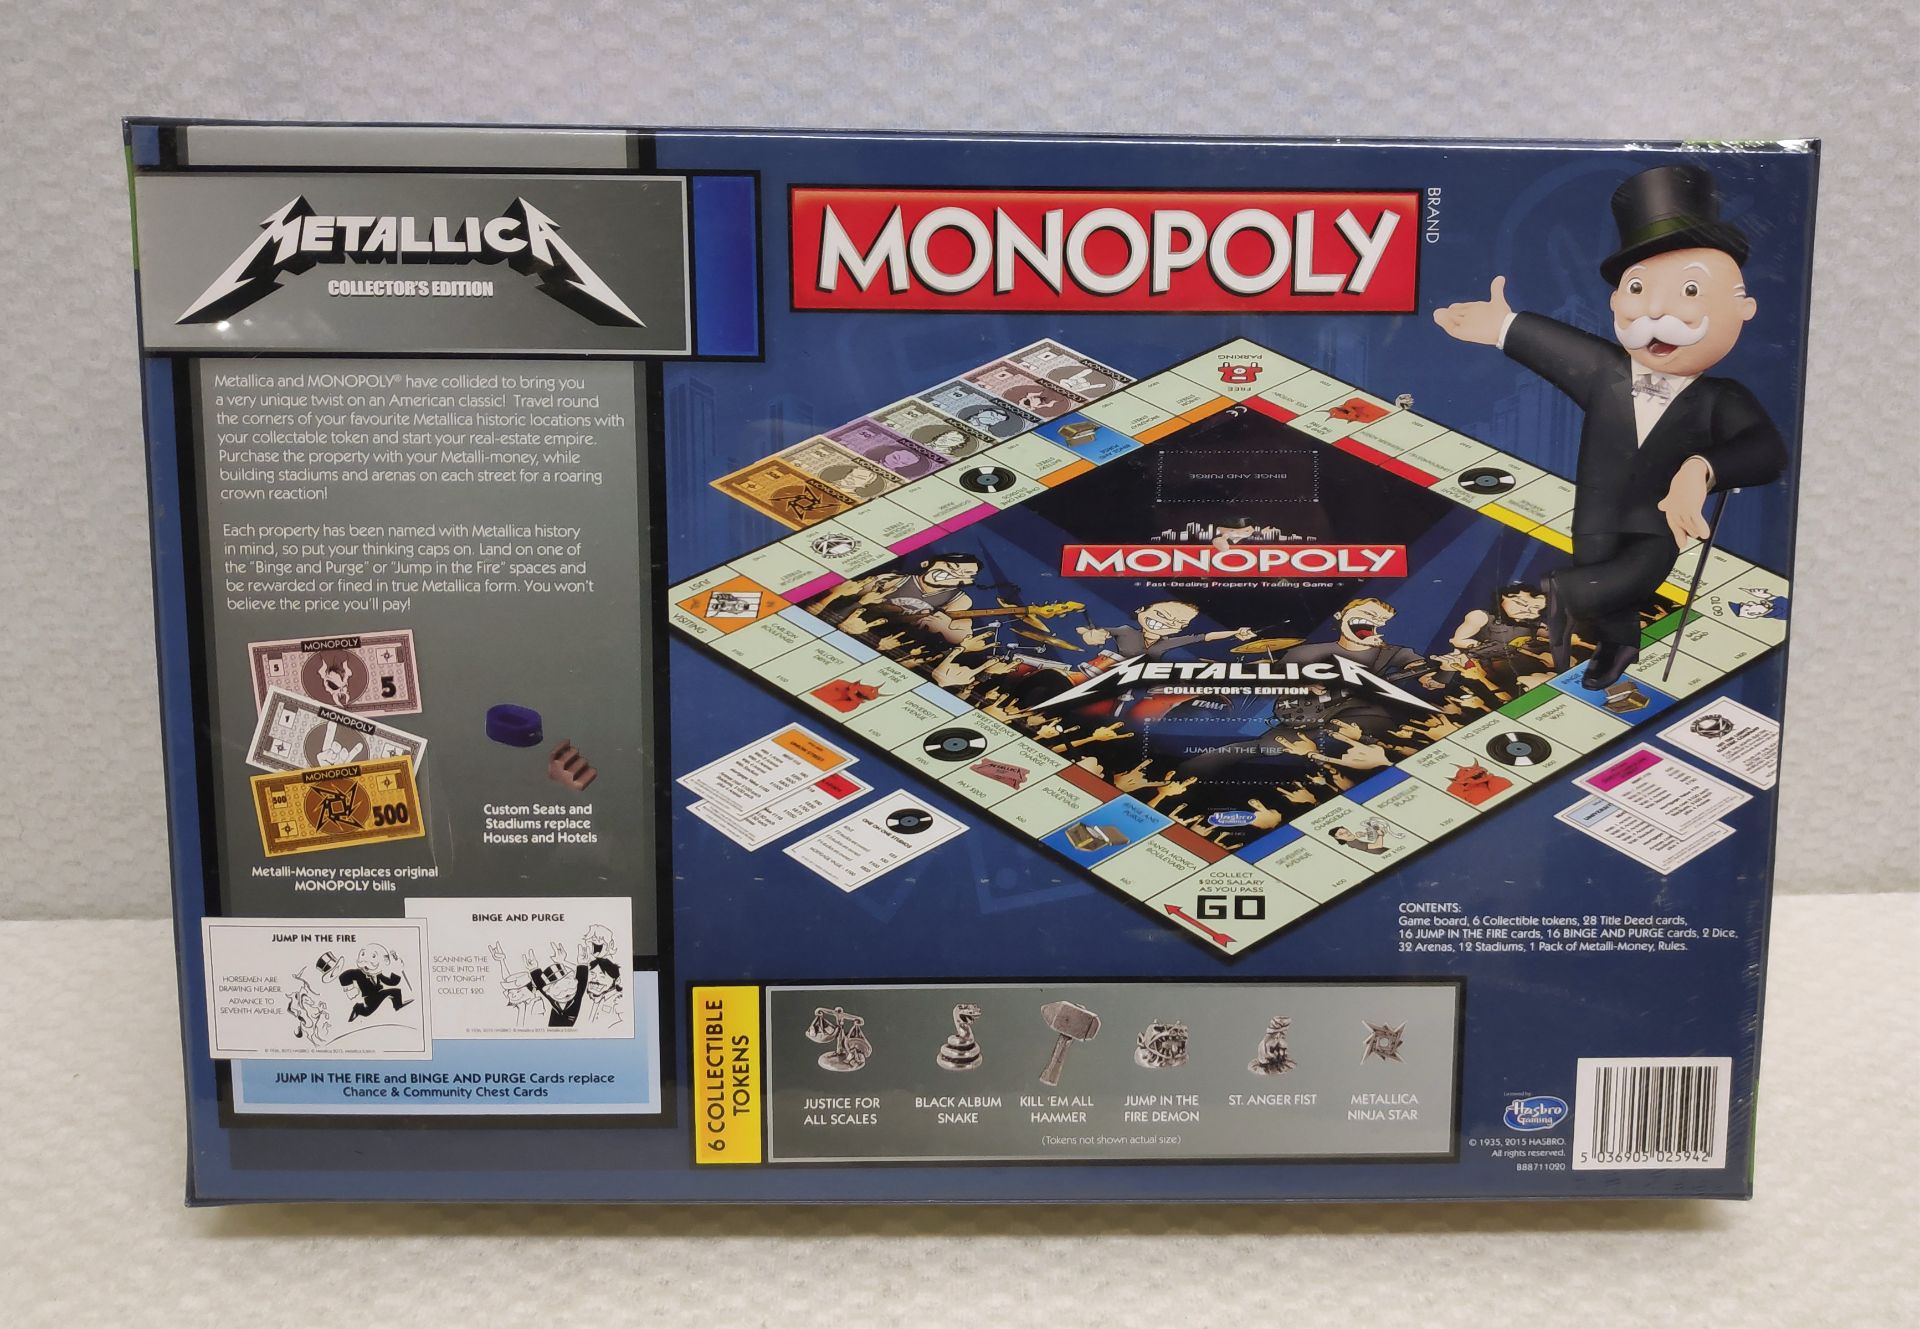 1 x Metallica Collector's Edition Monopoly - New/Sealed - Image 7 of 8